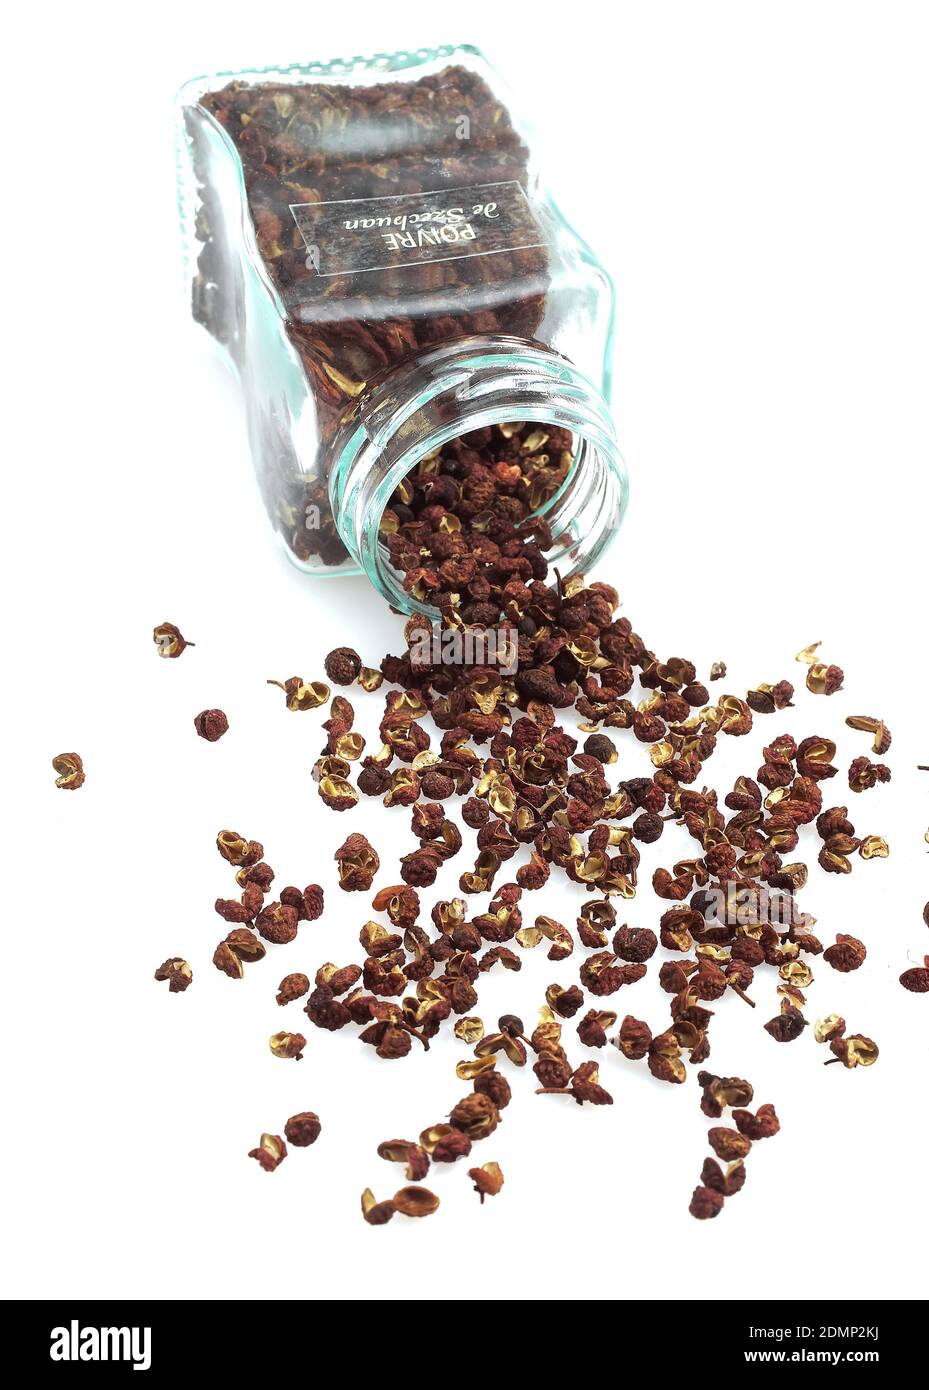 Czechuan or Sichuan Pepper, zanthoxylum simulans against White Background Stock Photo